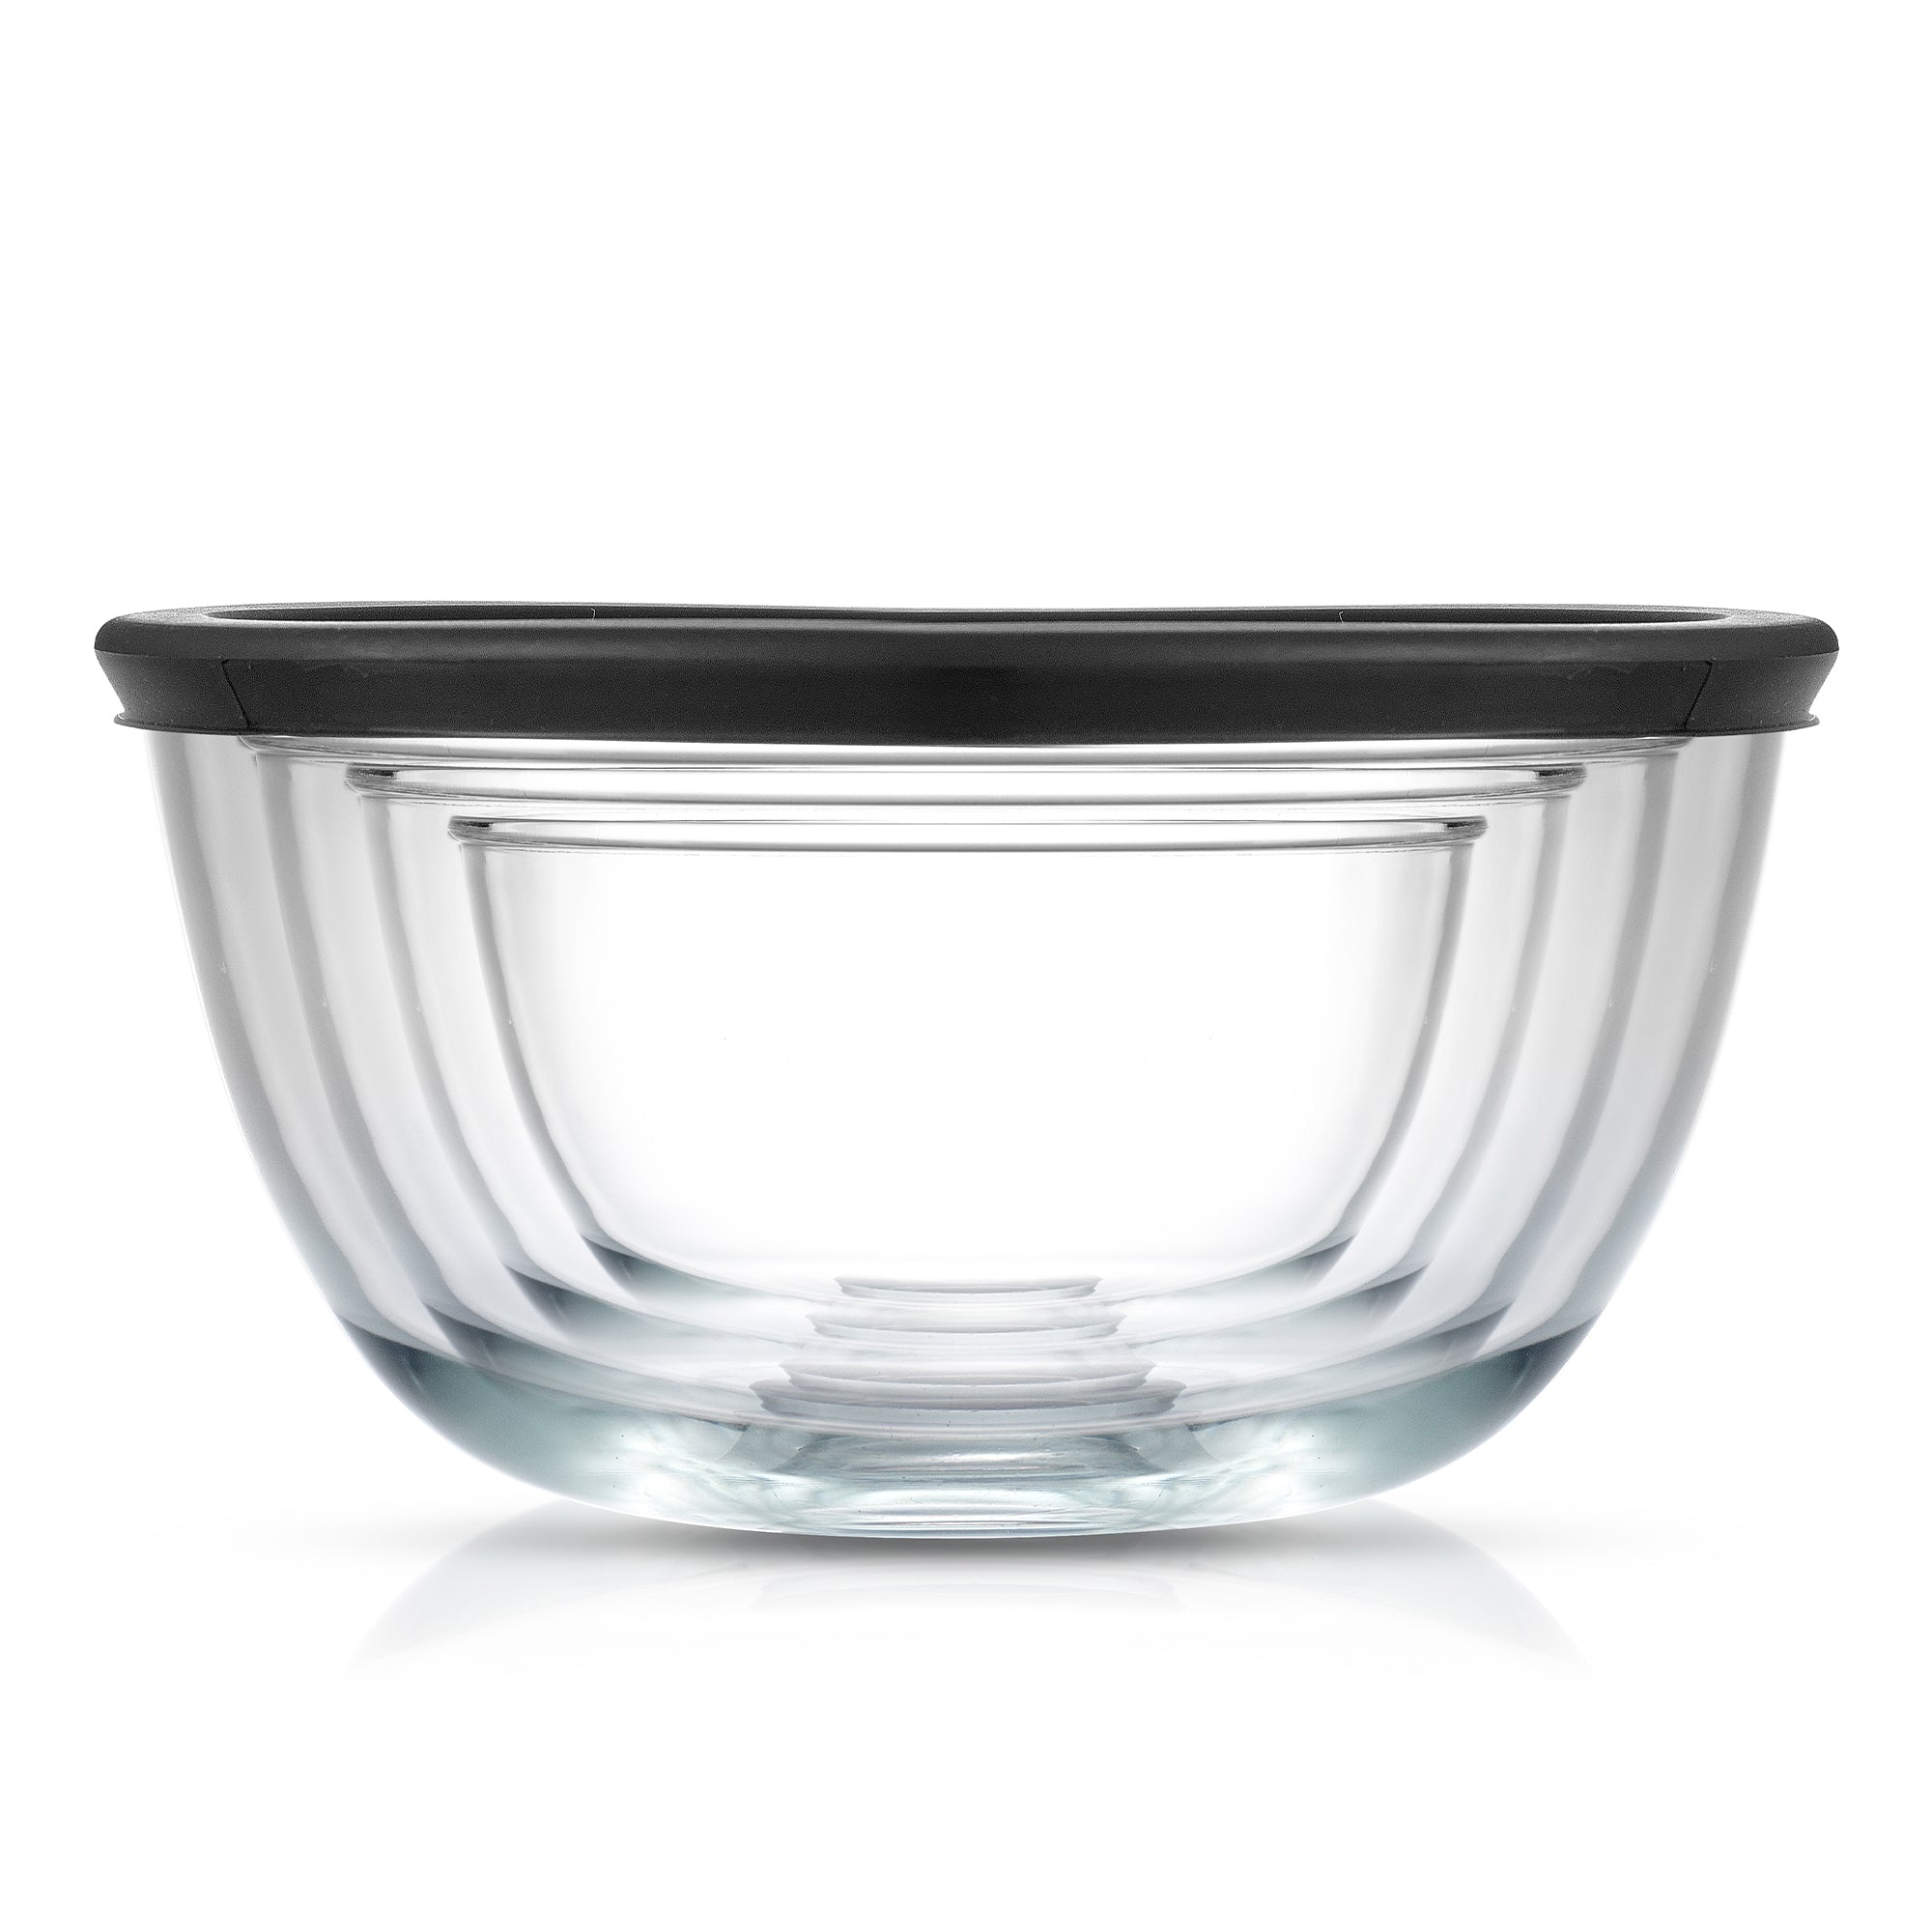 Glass bowl with black lid on white background - JoyJolt 4 Large Glass Mixing Bowls With Lids.